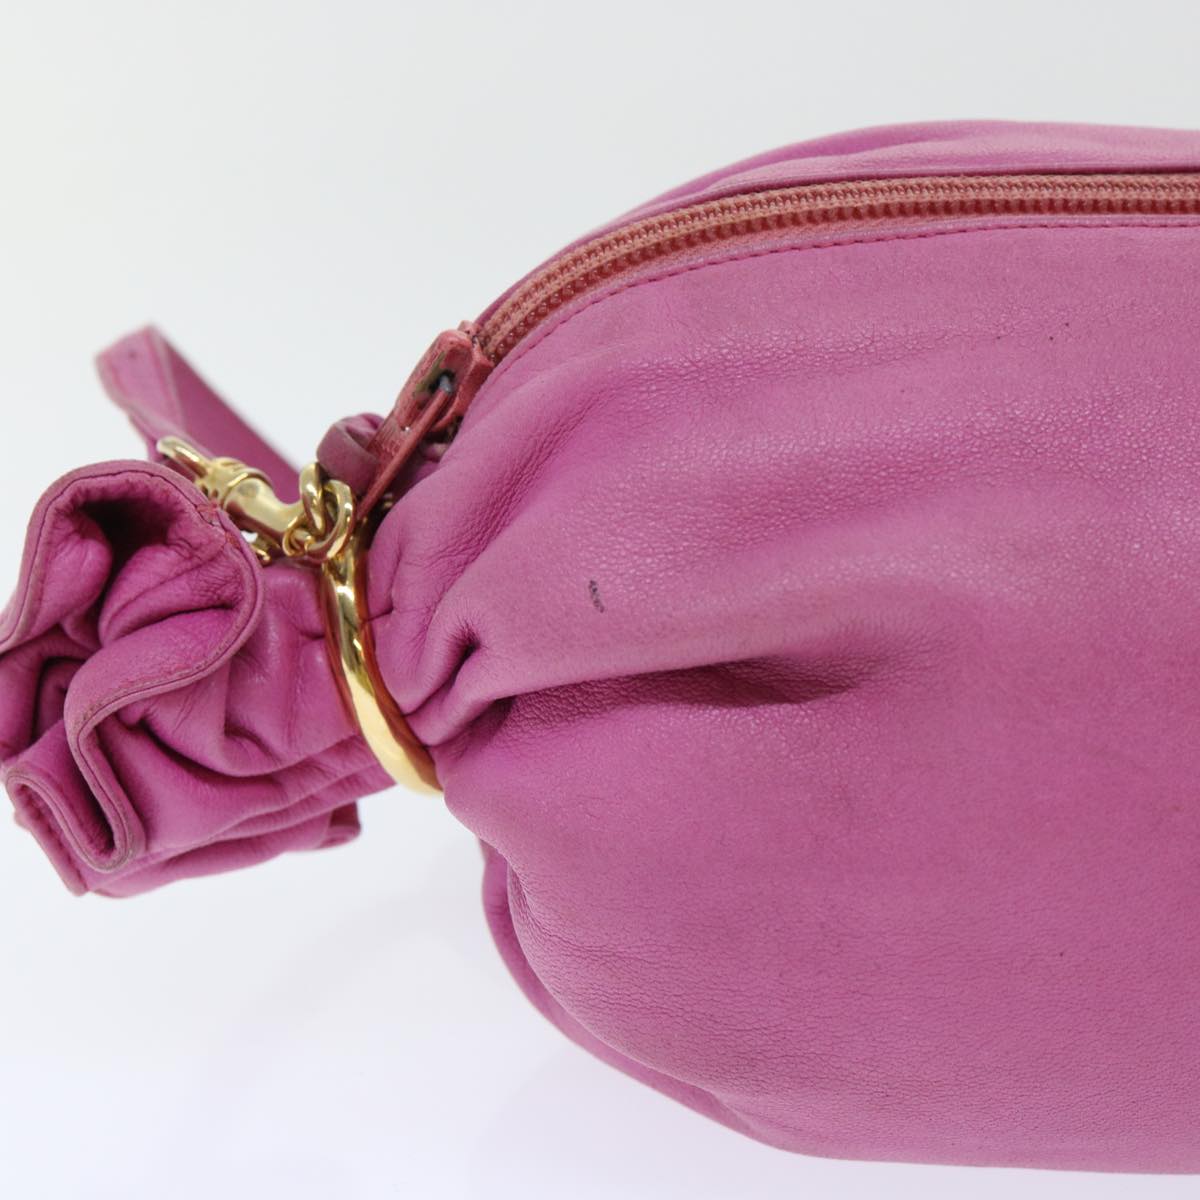 BALLY Shoulder Bag Leather Pink Auth yk8158